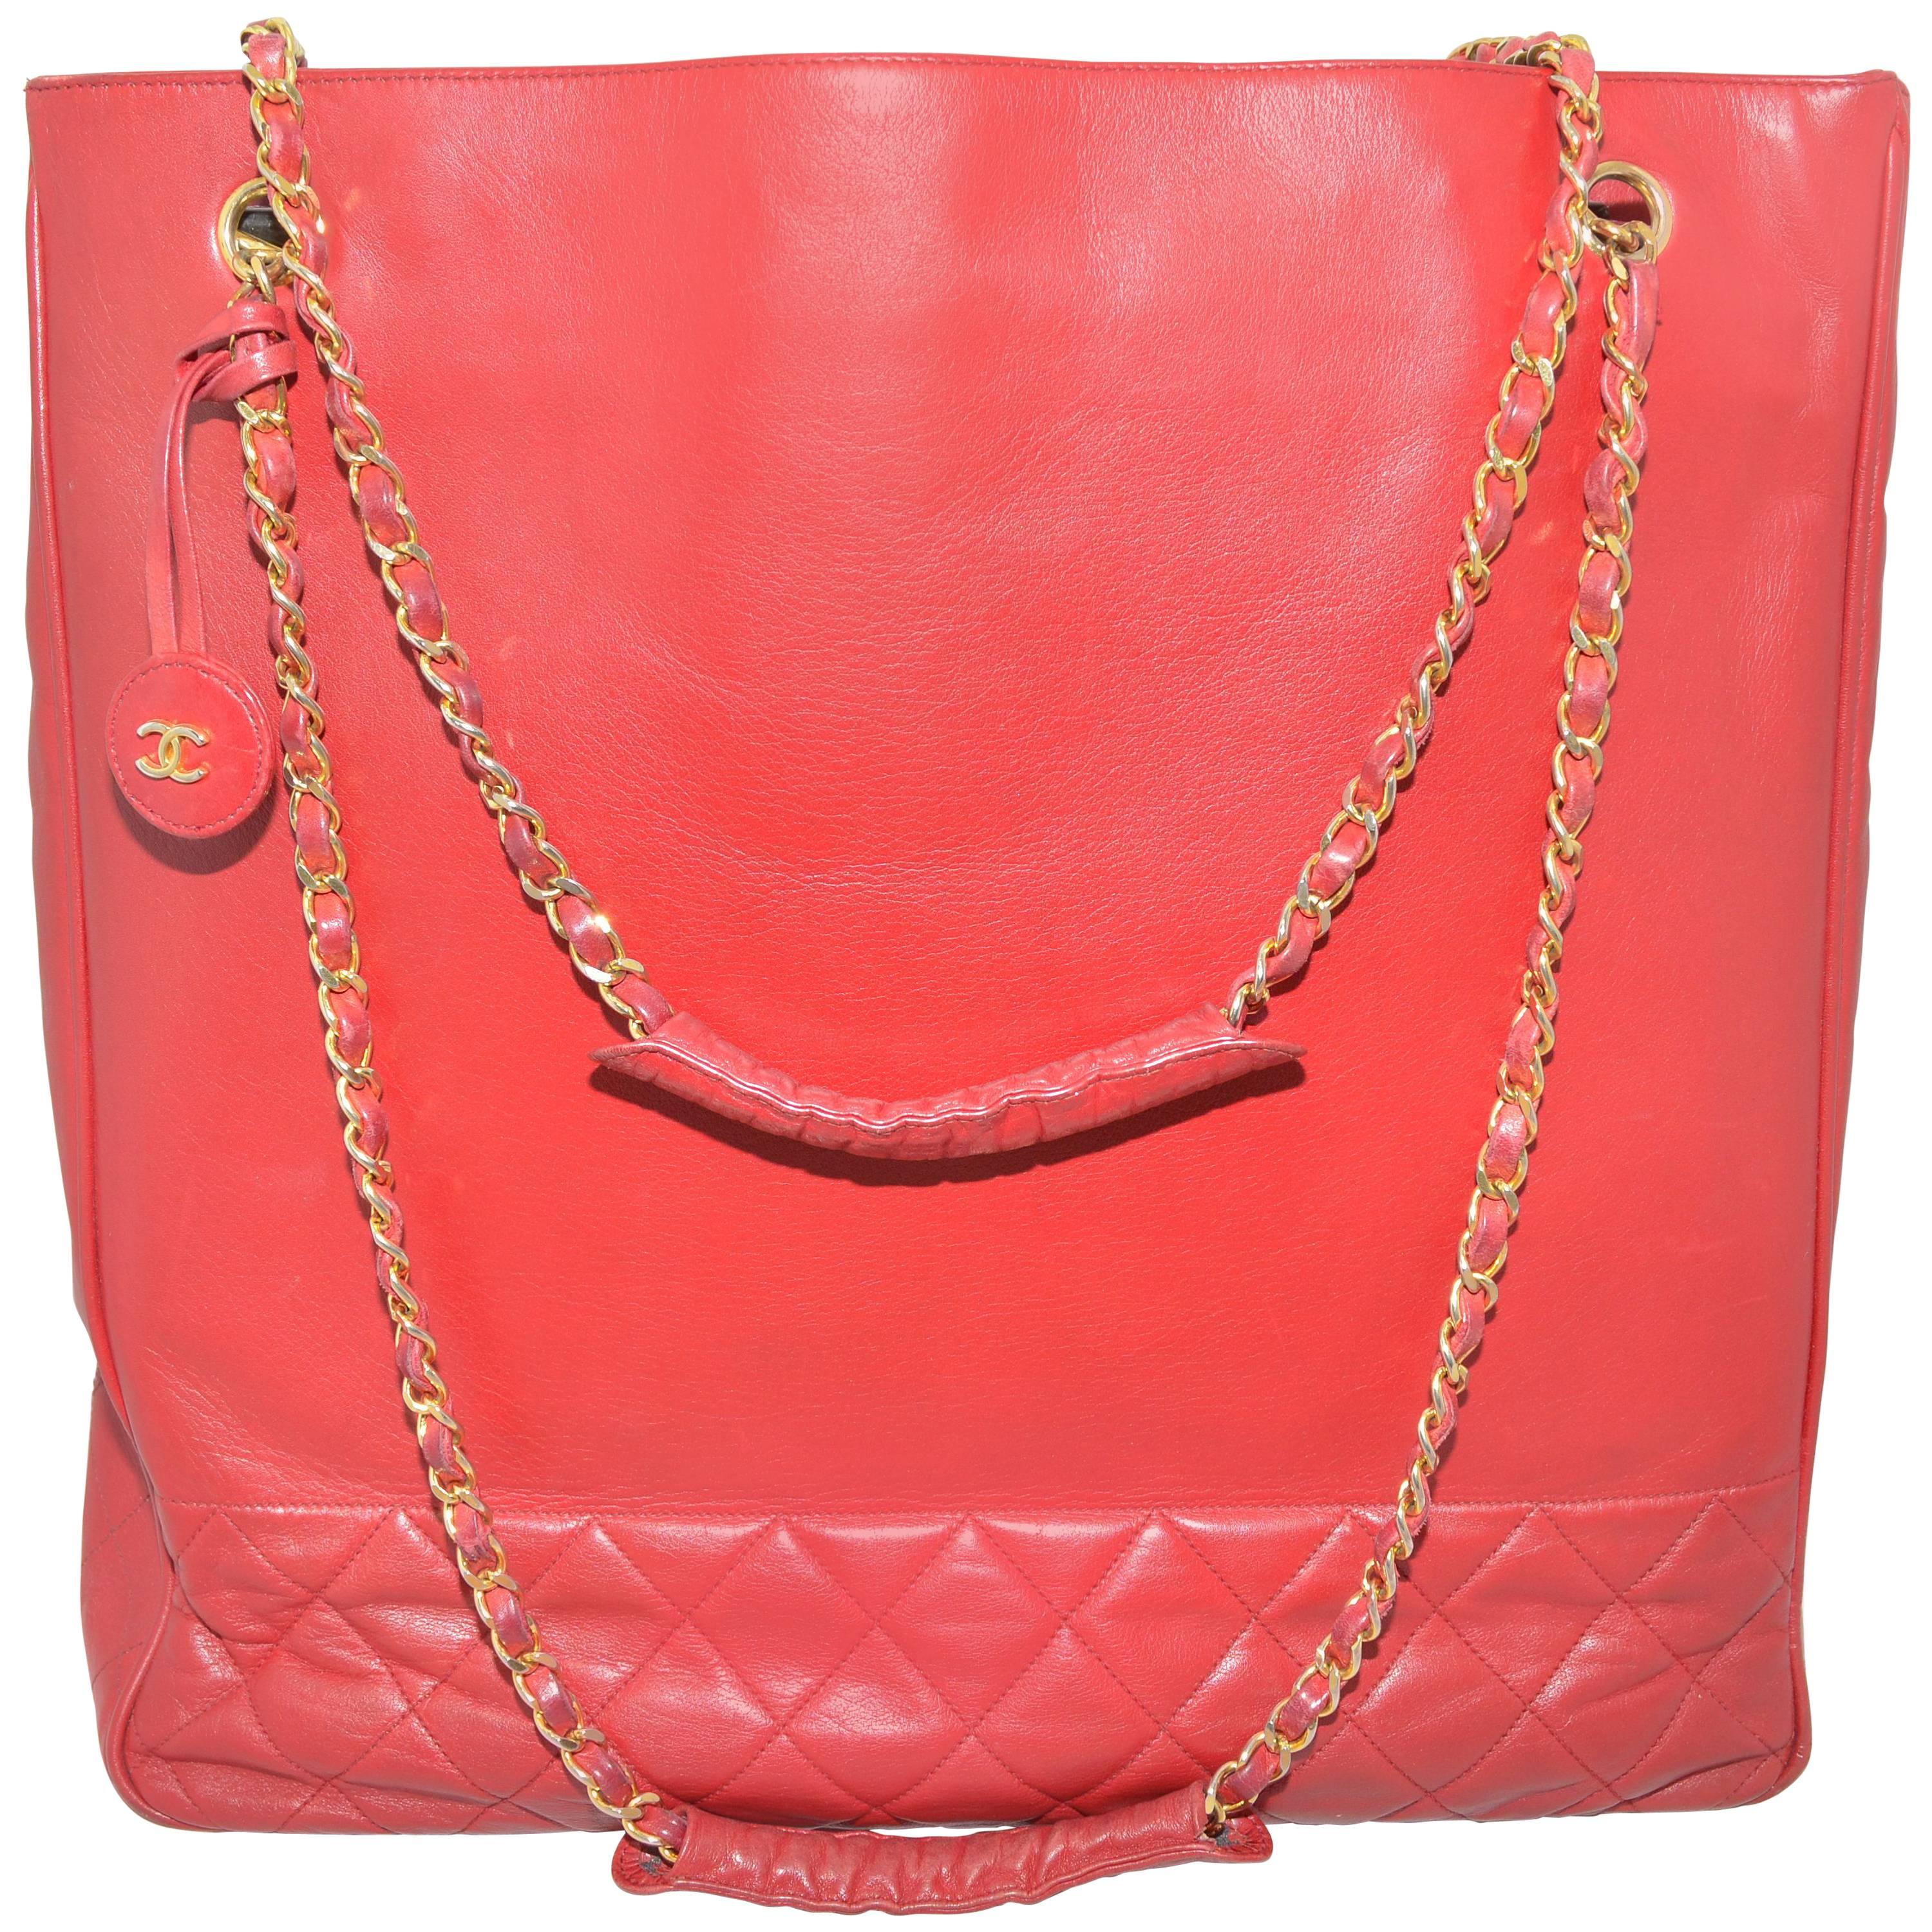 Chanel Red Leather VL Vintage Tote 